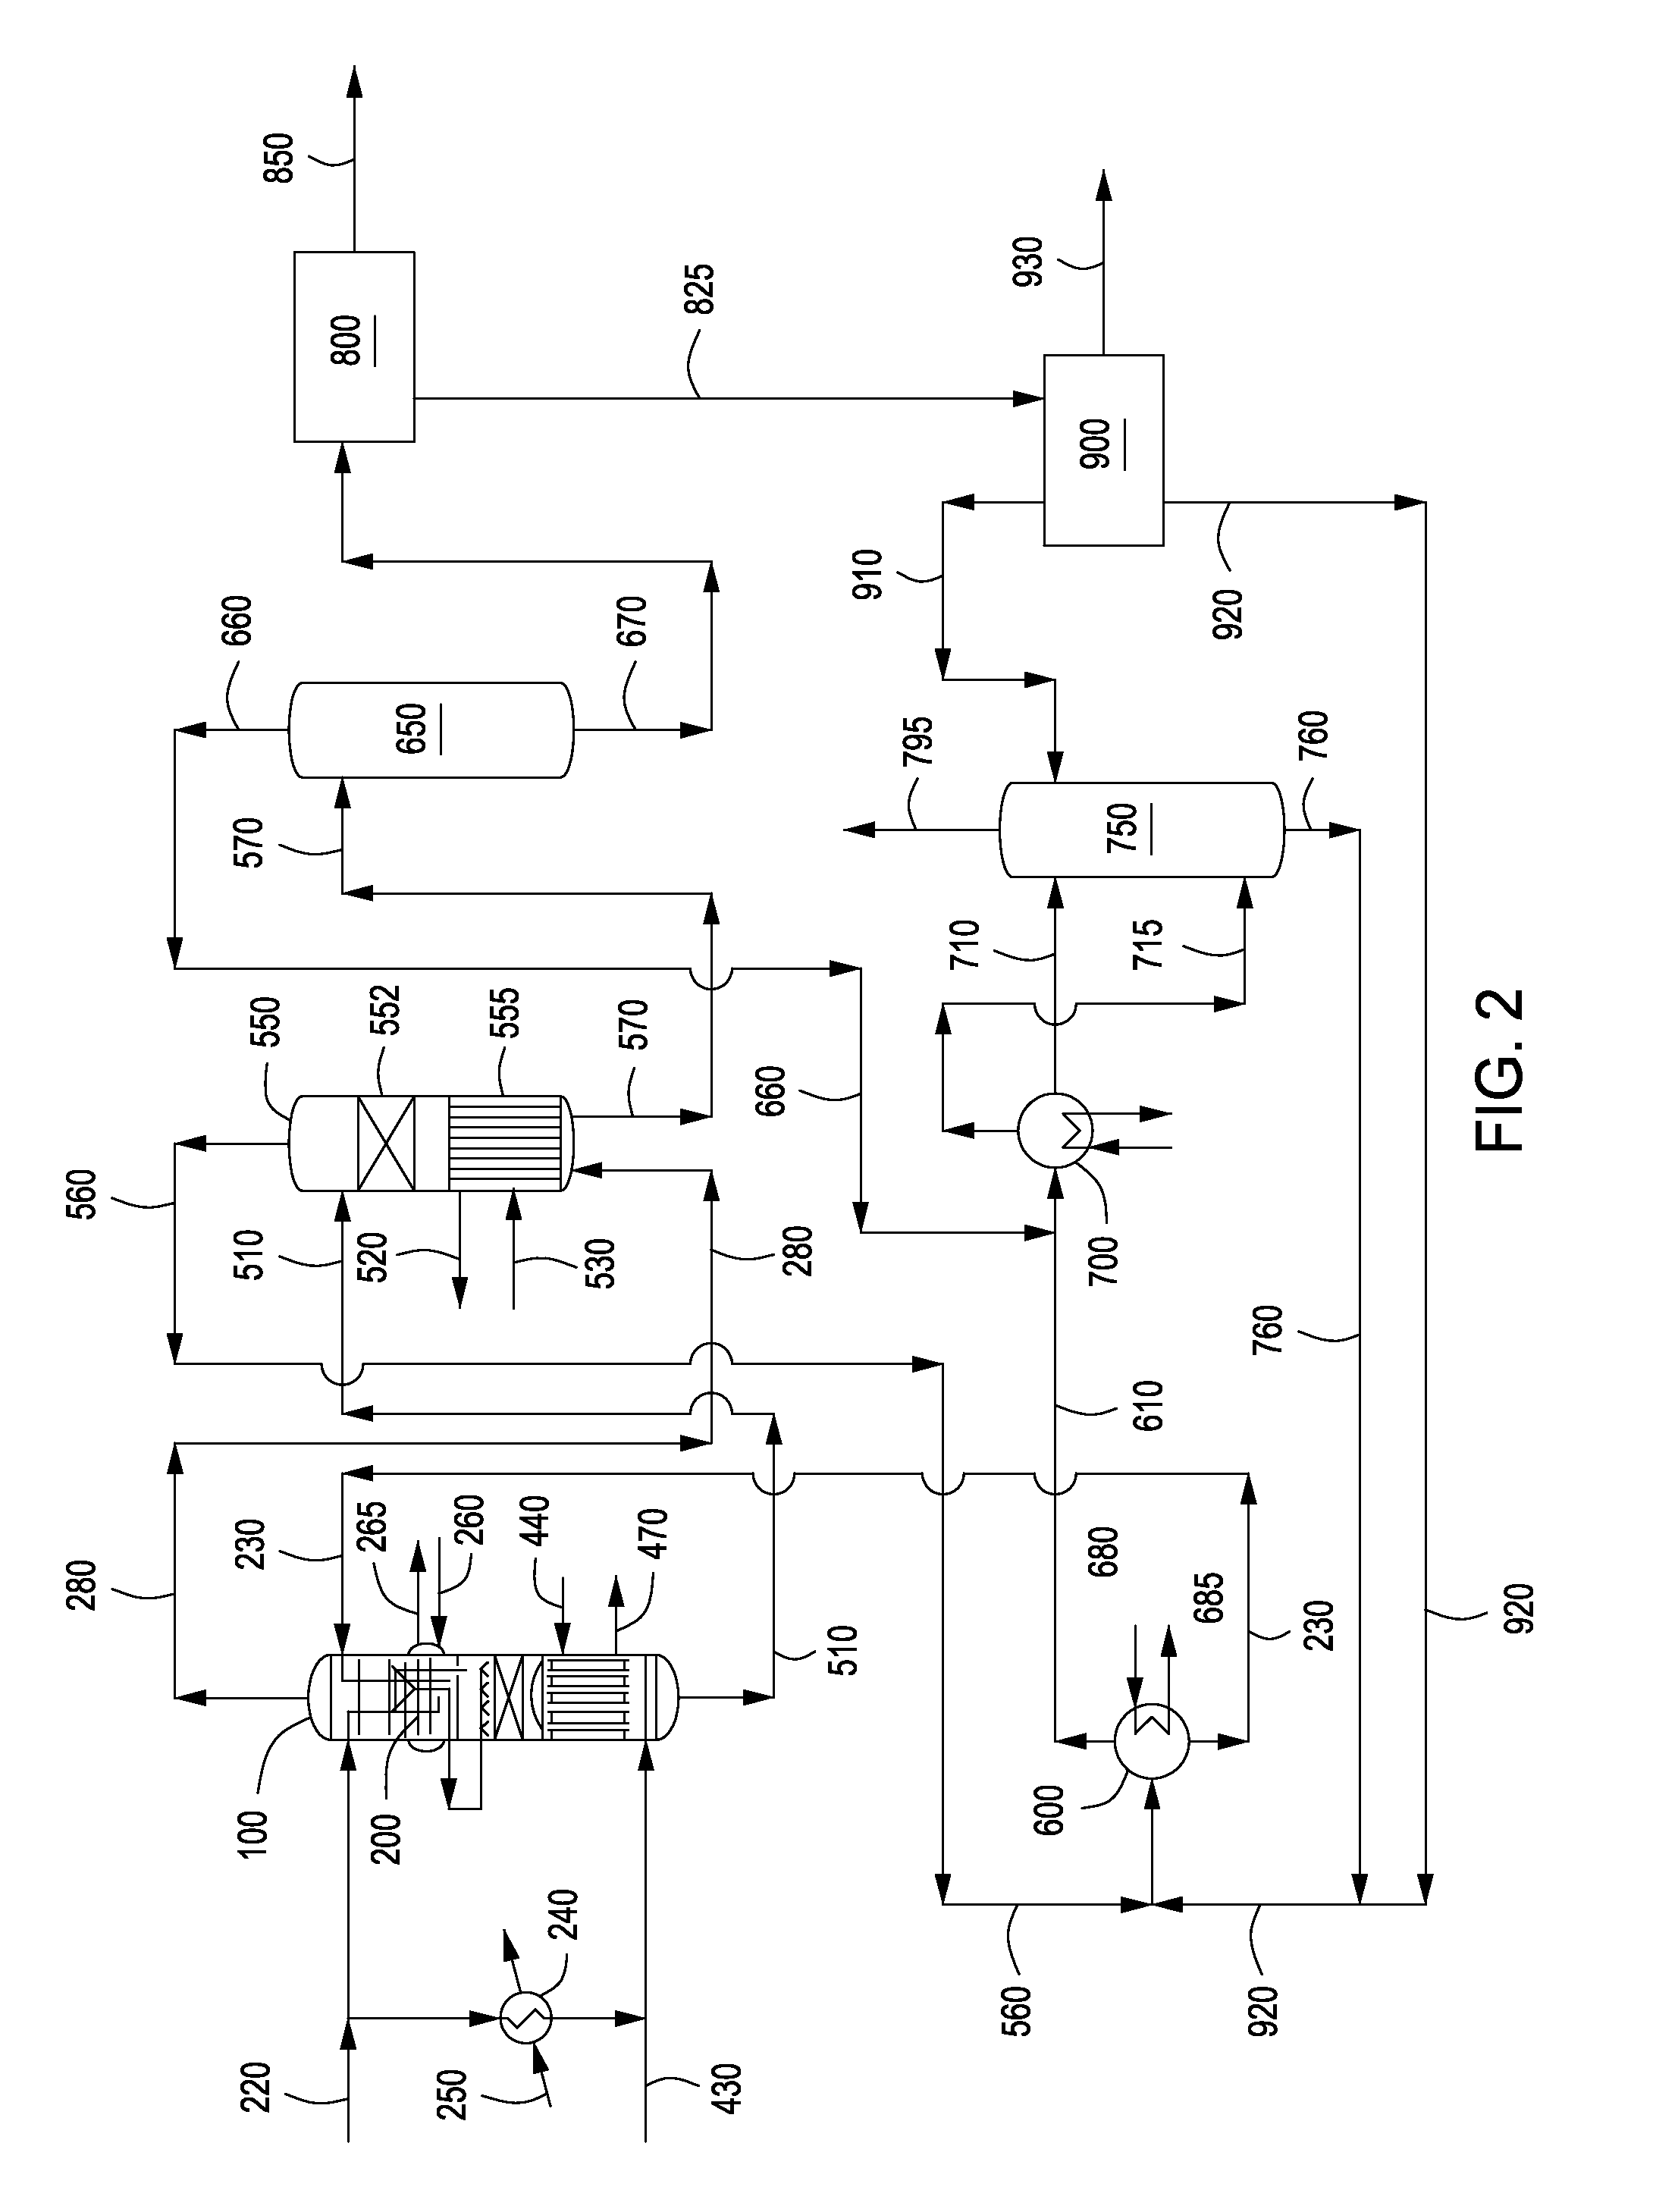 Apparatus and methods for urea production